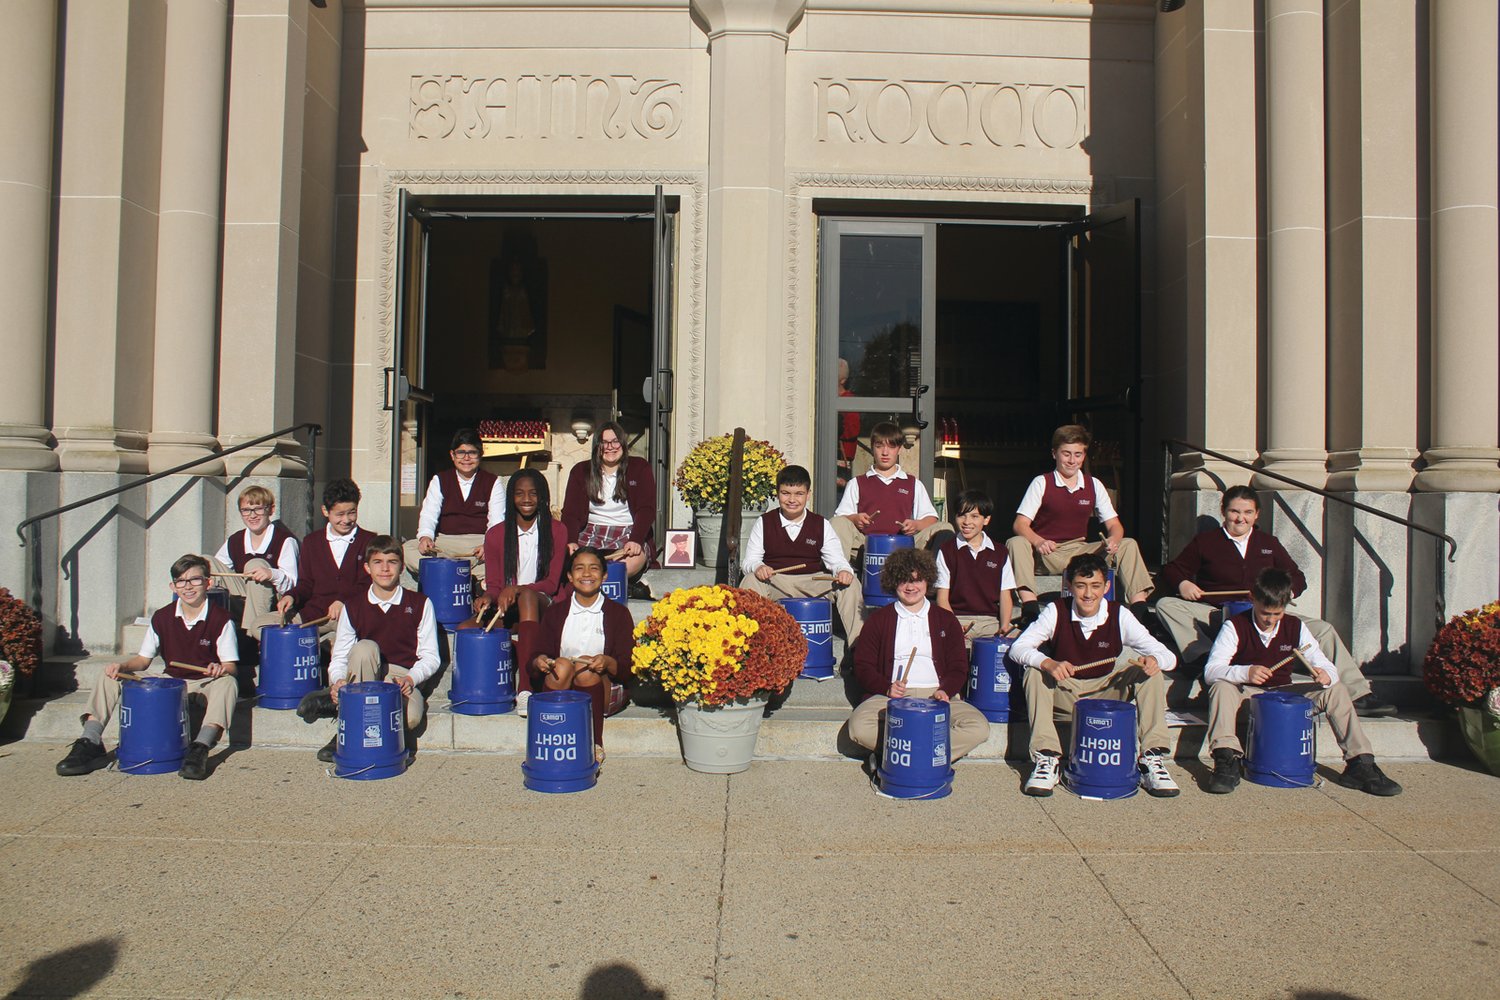 PATRIOTIC PRAYERS: Seventh grade students played "Stars & Stripes Forever" on drums as guests gathered outside St. Rocco School, which held its Veterans Day Prayer Service Wednesday, Nov. 9 at St. Rocco Church, 931 Atwood Ave., Johnston. Students from St. Rocco School read poems that they wrote, carried photos of loved ones, sang patriotic songs and prayed for all veterans.  Also, the school held a “Dress Down Day” for "Operation Christmas Stocking" where students dressed in red, white and blue, along with donating a dollar for the cause. Proceeds will go toward filling stockings for soldiers in the 43rd MP Brigade. (Photos courtesy Robin Okolowitcz of St. Rocco School)